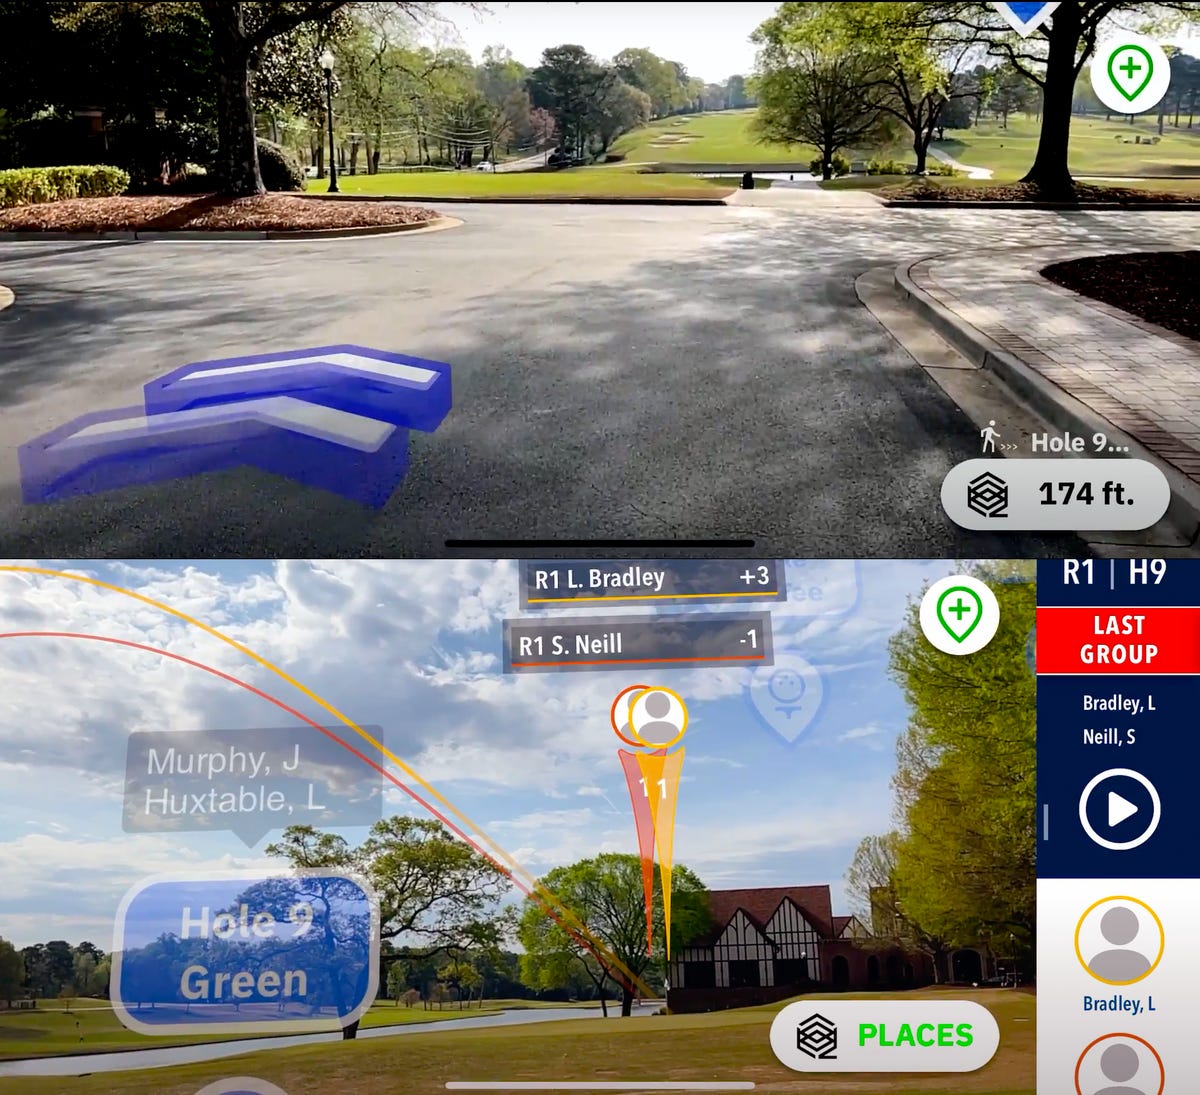 Screenshots showing overlaid directions and data on top of golf courses